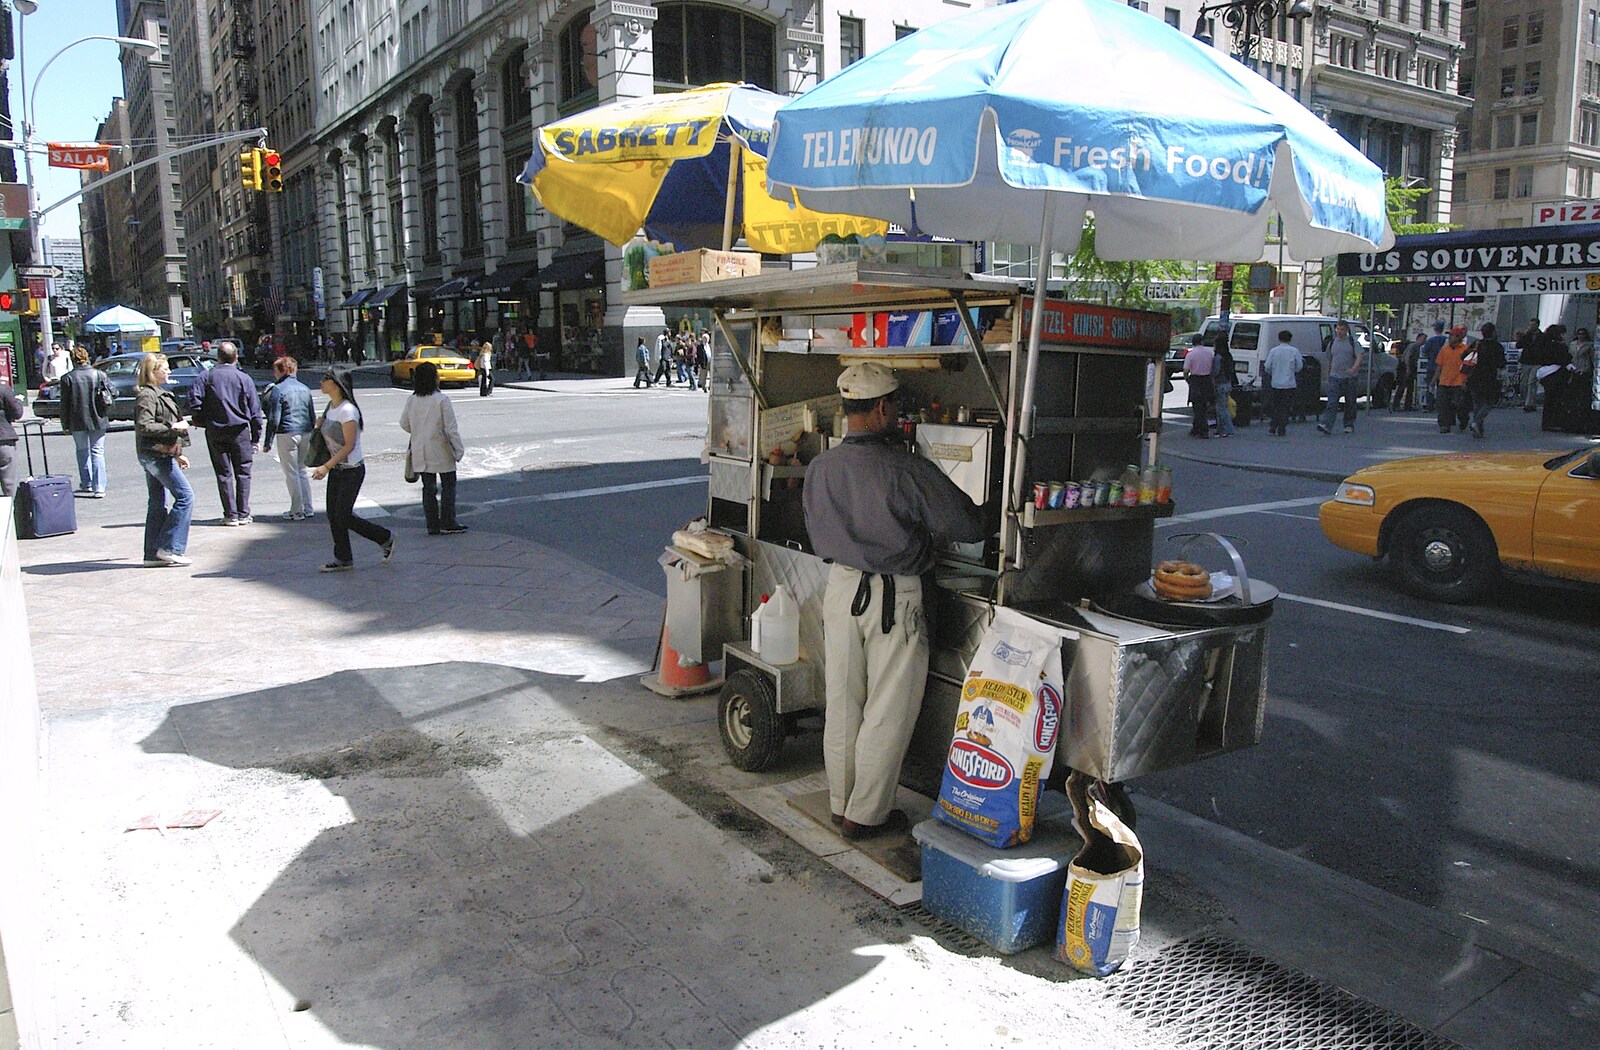 Another street, another hot-dog stand from Times Square, the Empire State and Ground Zero, New York, US - 1st May 2006